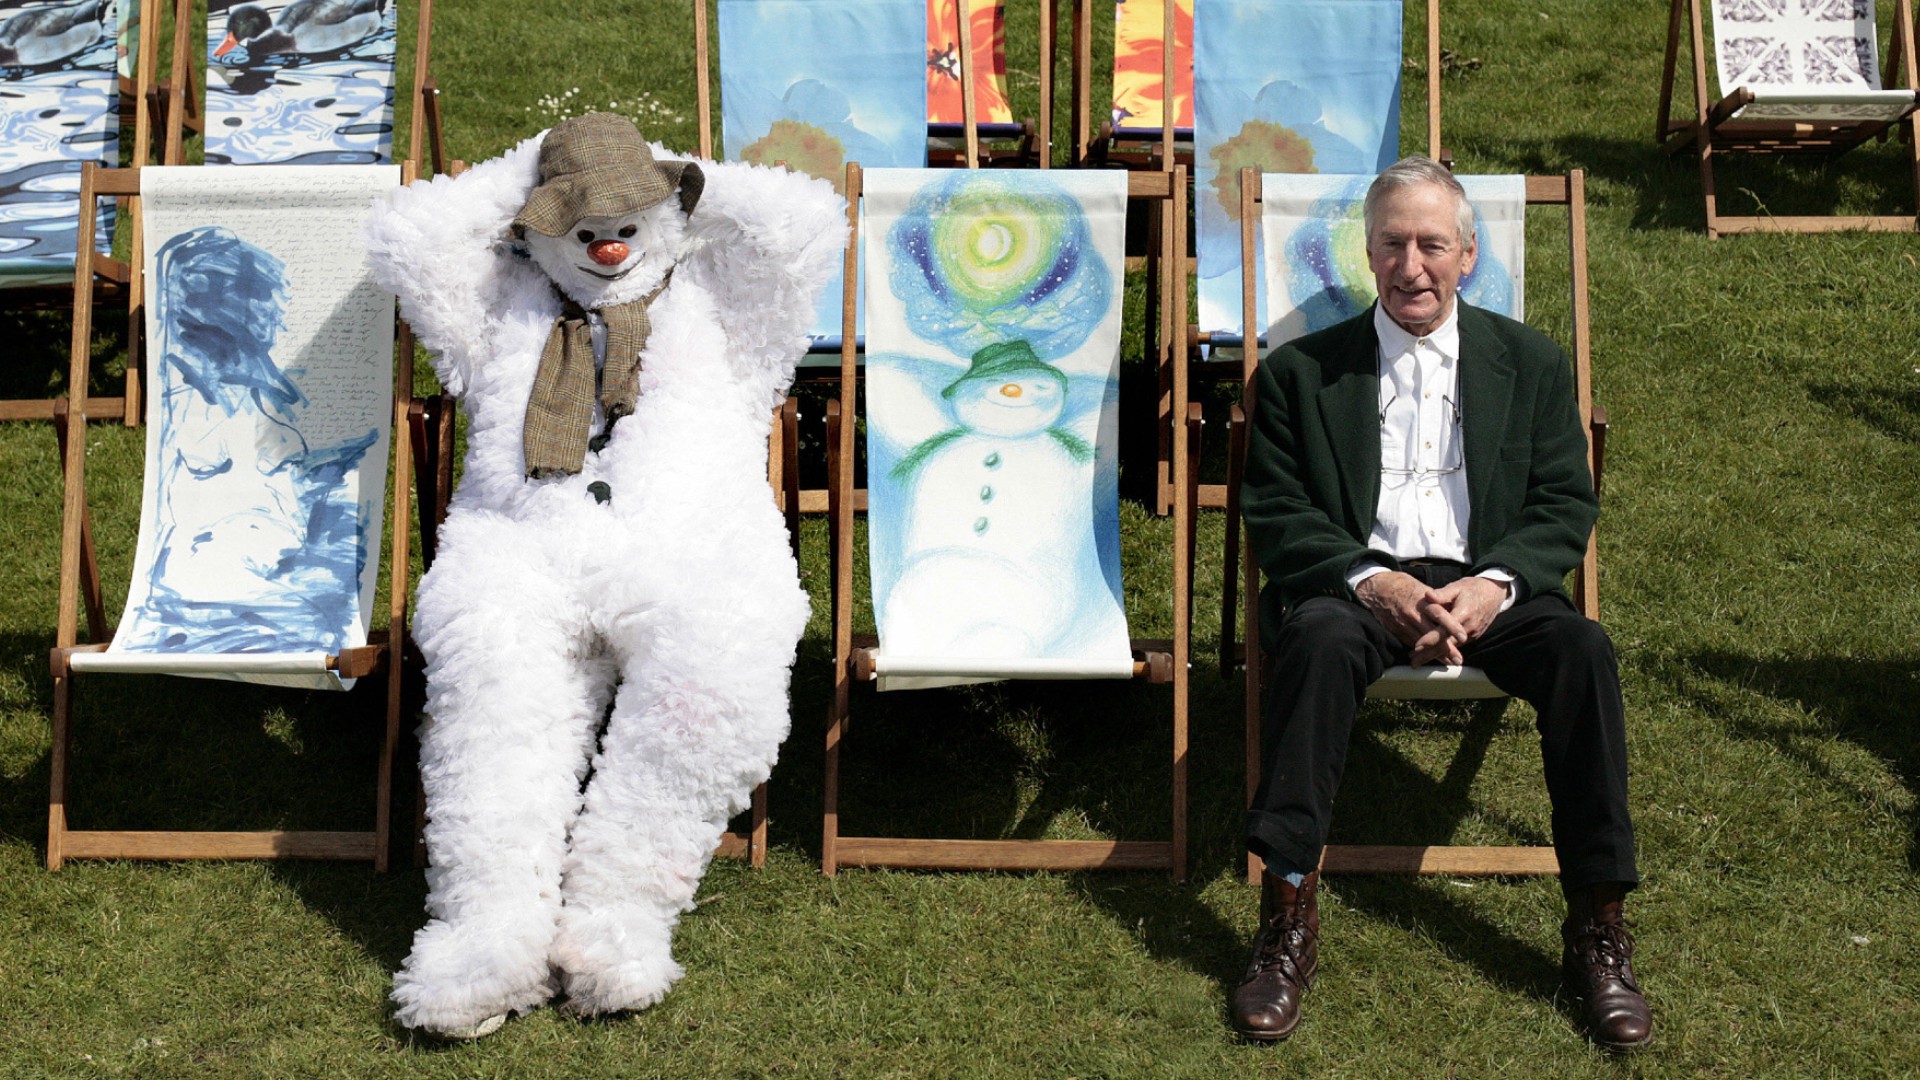 'The Snowman' Creator Raymond Briggs Has Died at Age 88